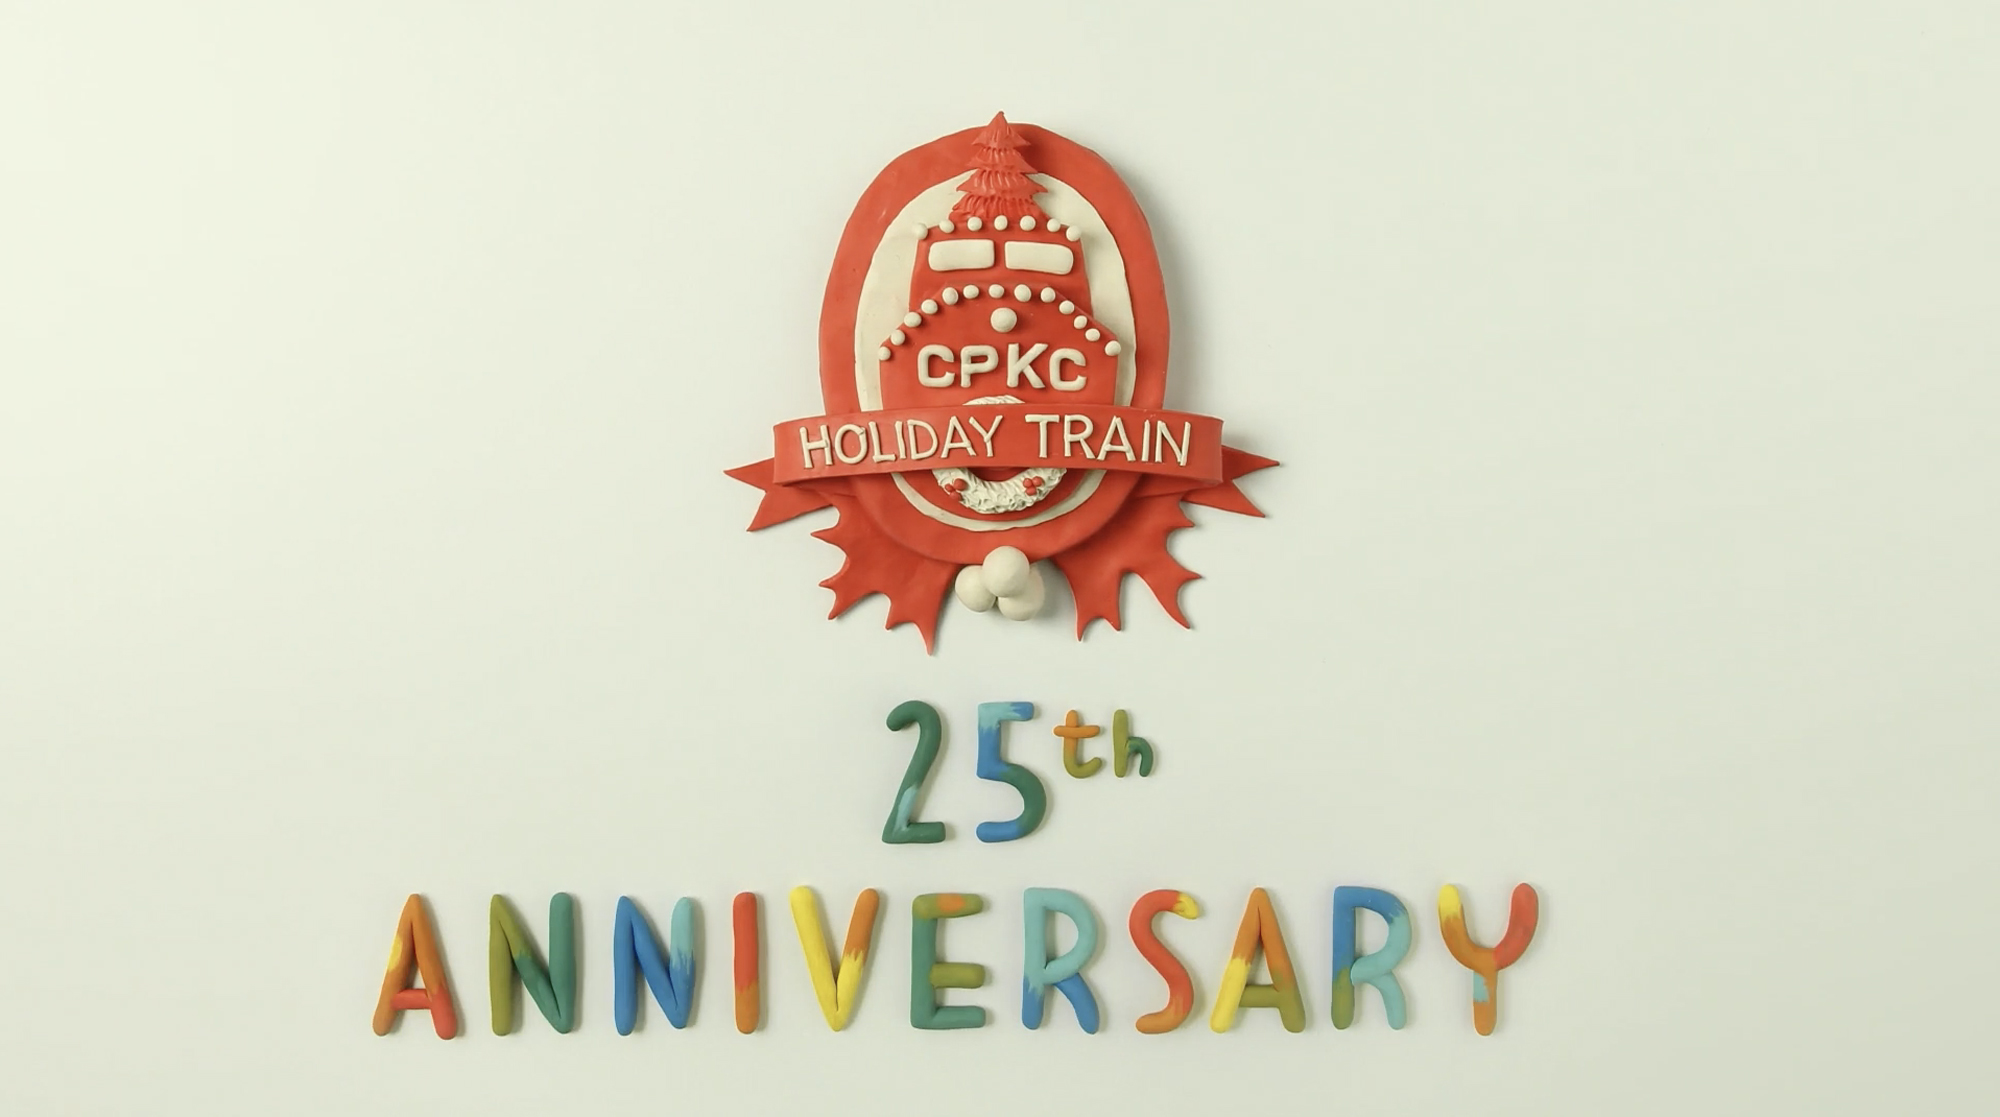 Canadian Pacific Holiday Train 25 Anniversary